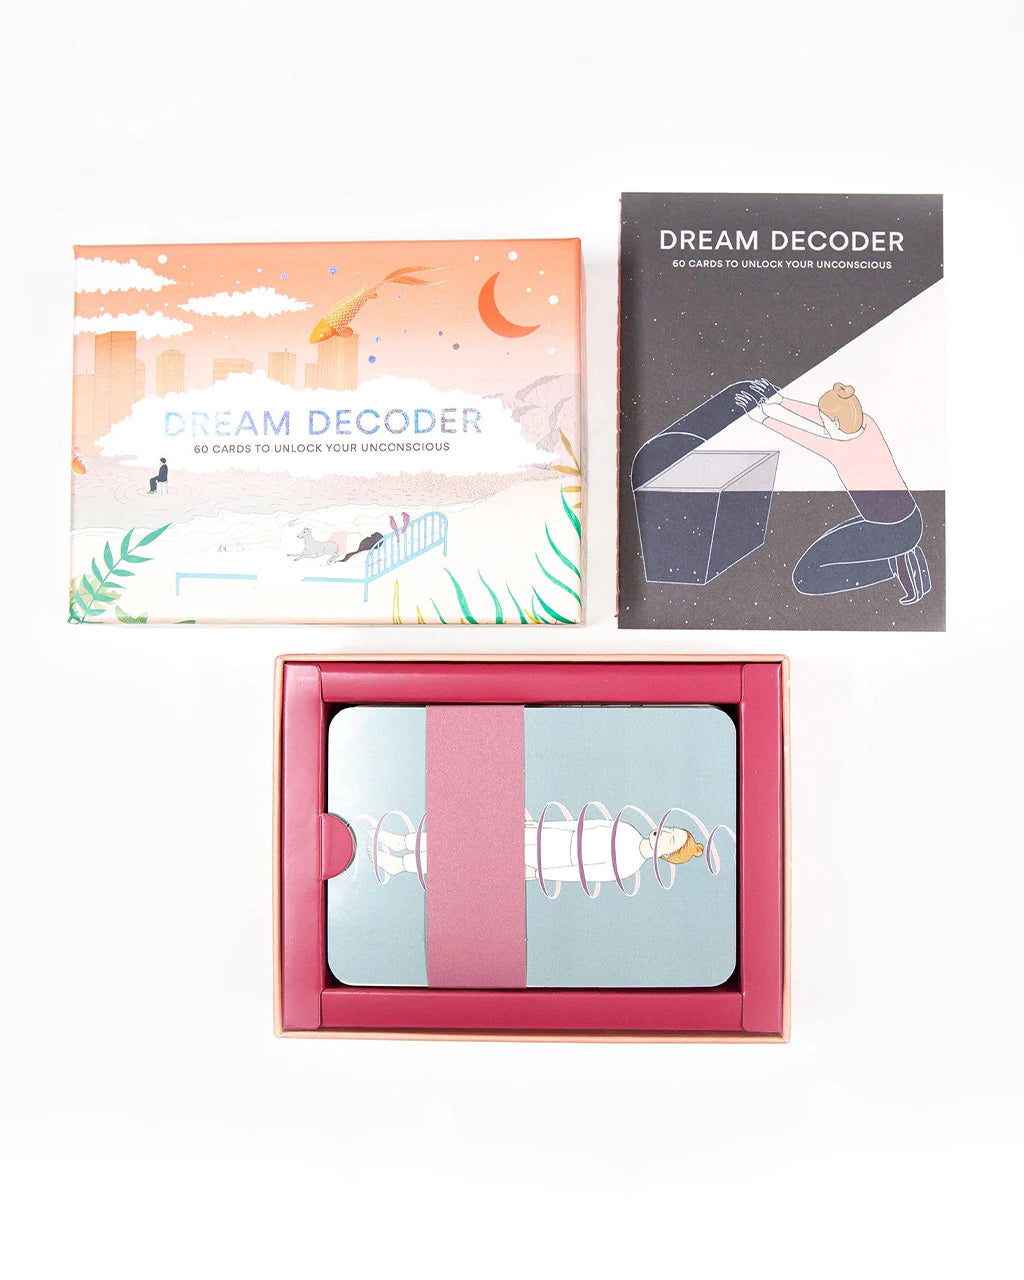 Dream Decoder: 60 Cards To Unlock Your Unconscious